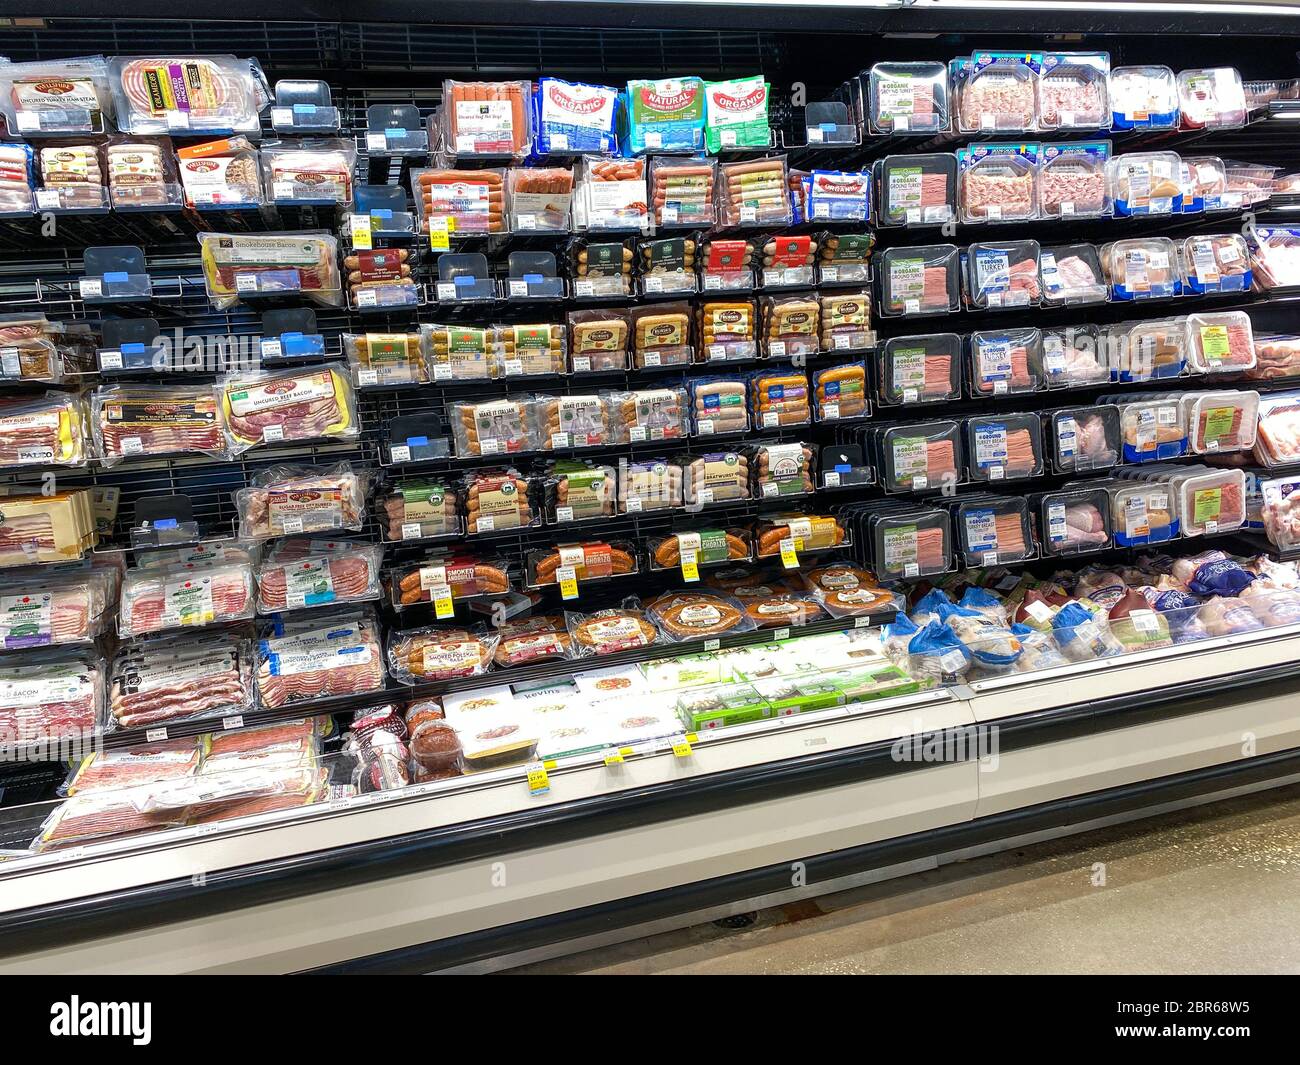 Orlando,FL/USA-5/3/20: A display of various packages of sausages at the meat department of a Whole Foods Market Grocery Store. Stock Photo